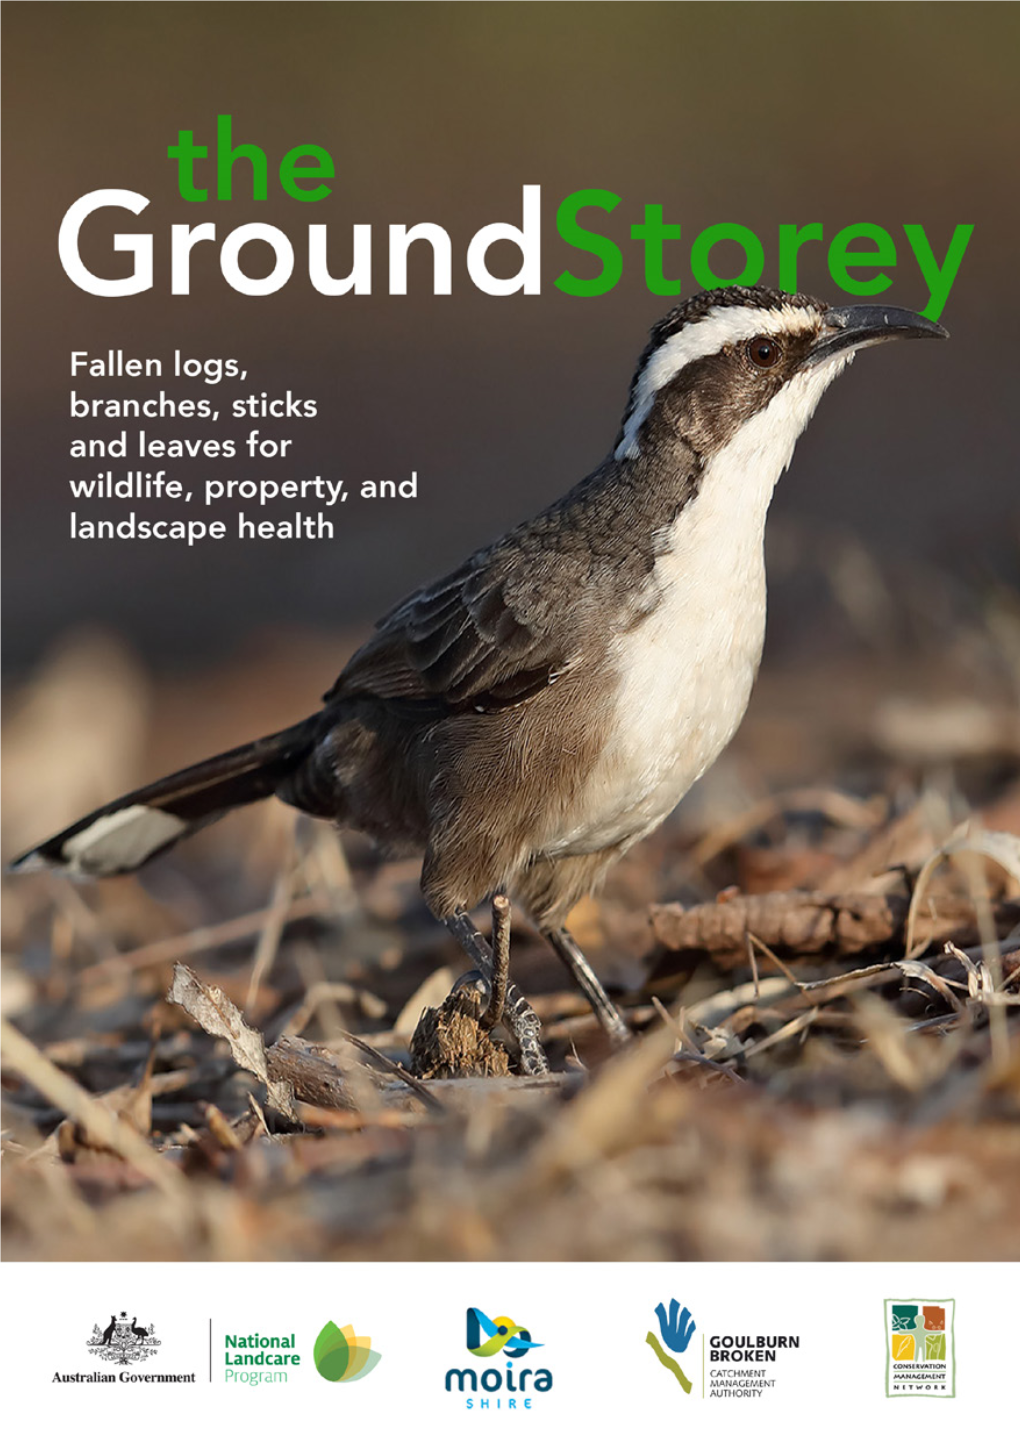 The Ground Storey: Fallen Logs, Branches, Sticks and Leaves for Wildlife, Property, and Landscape Health